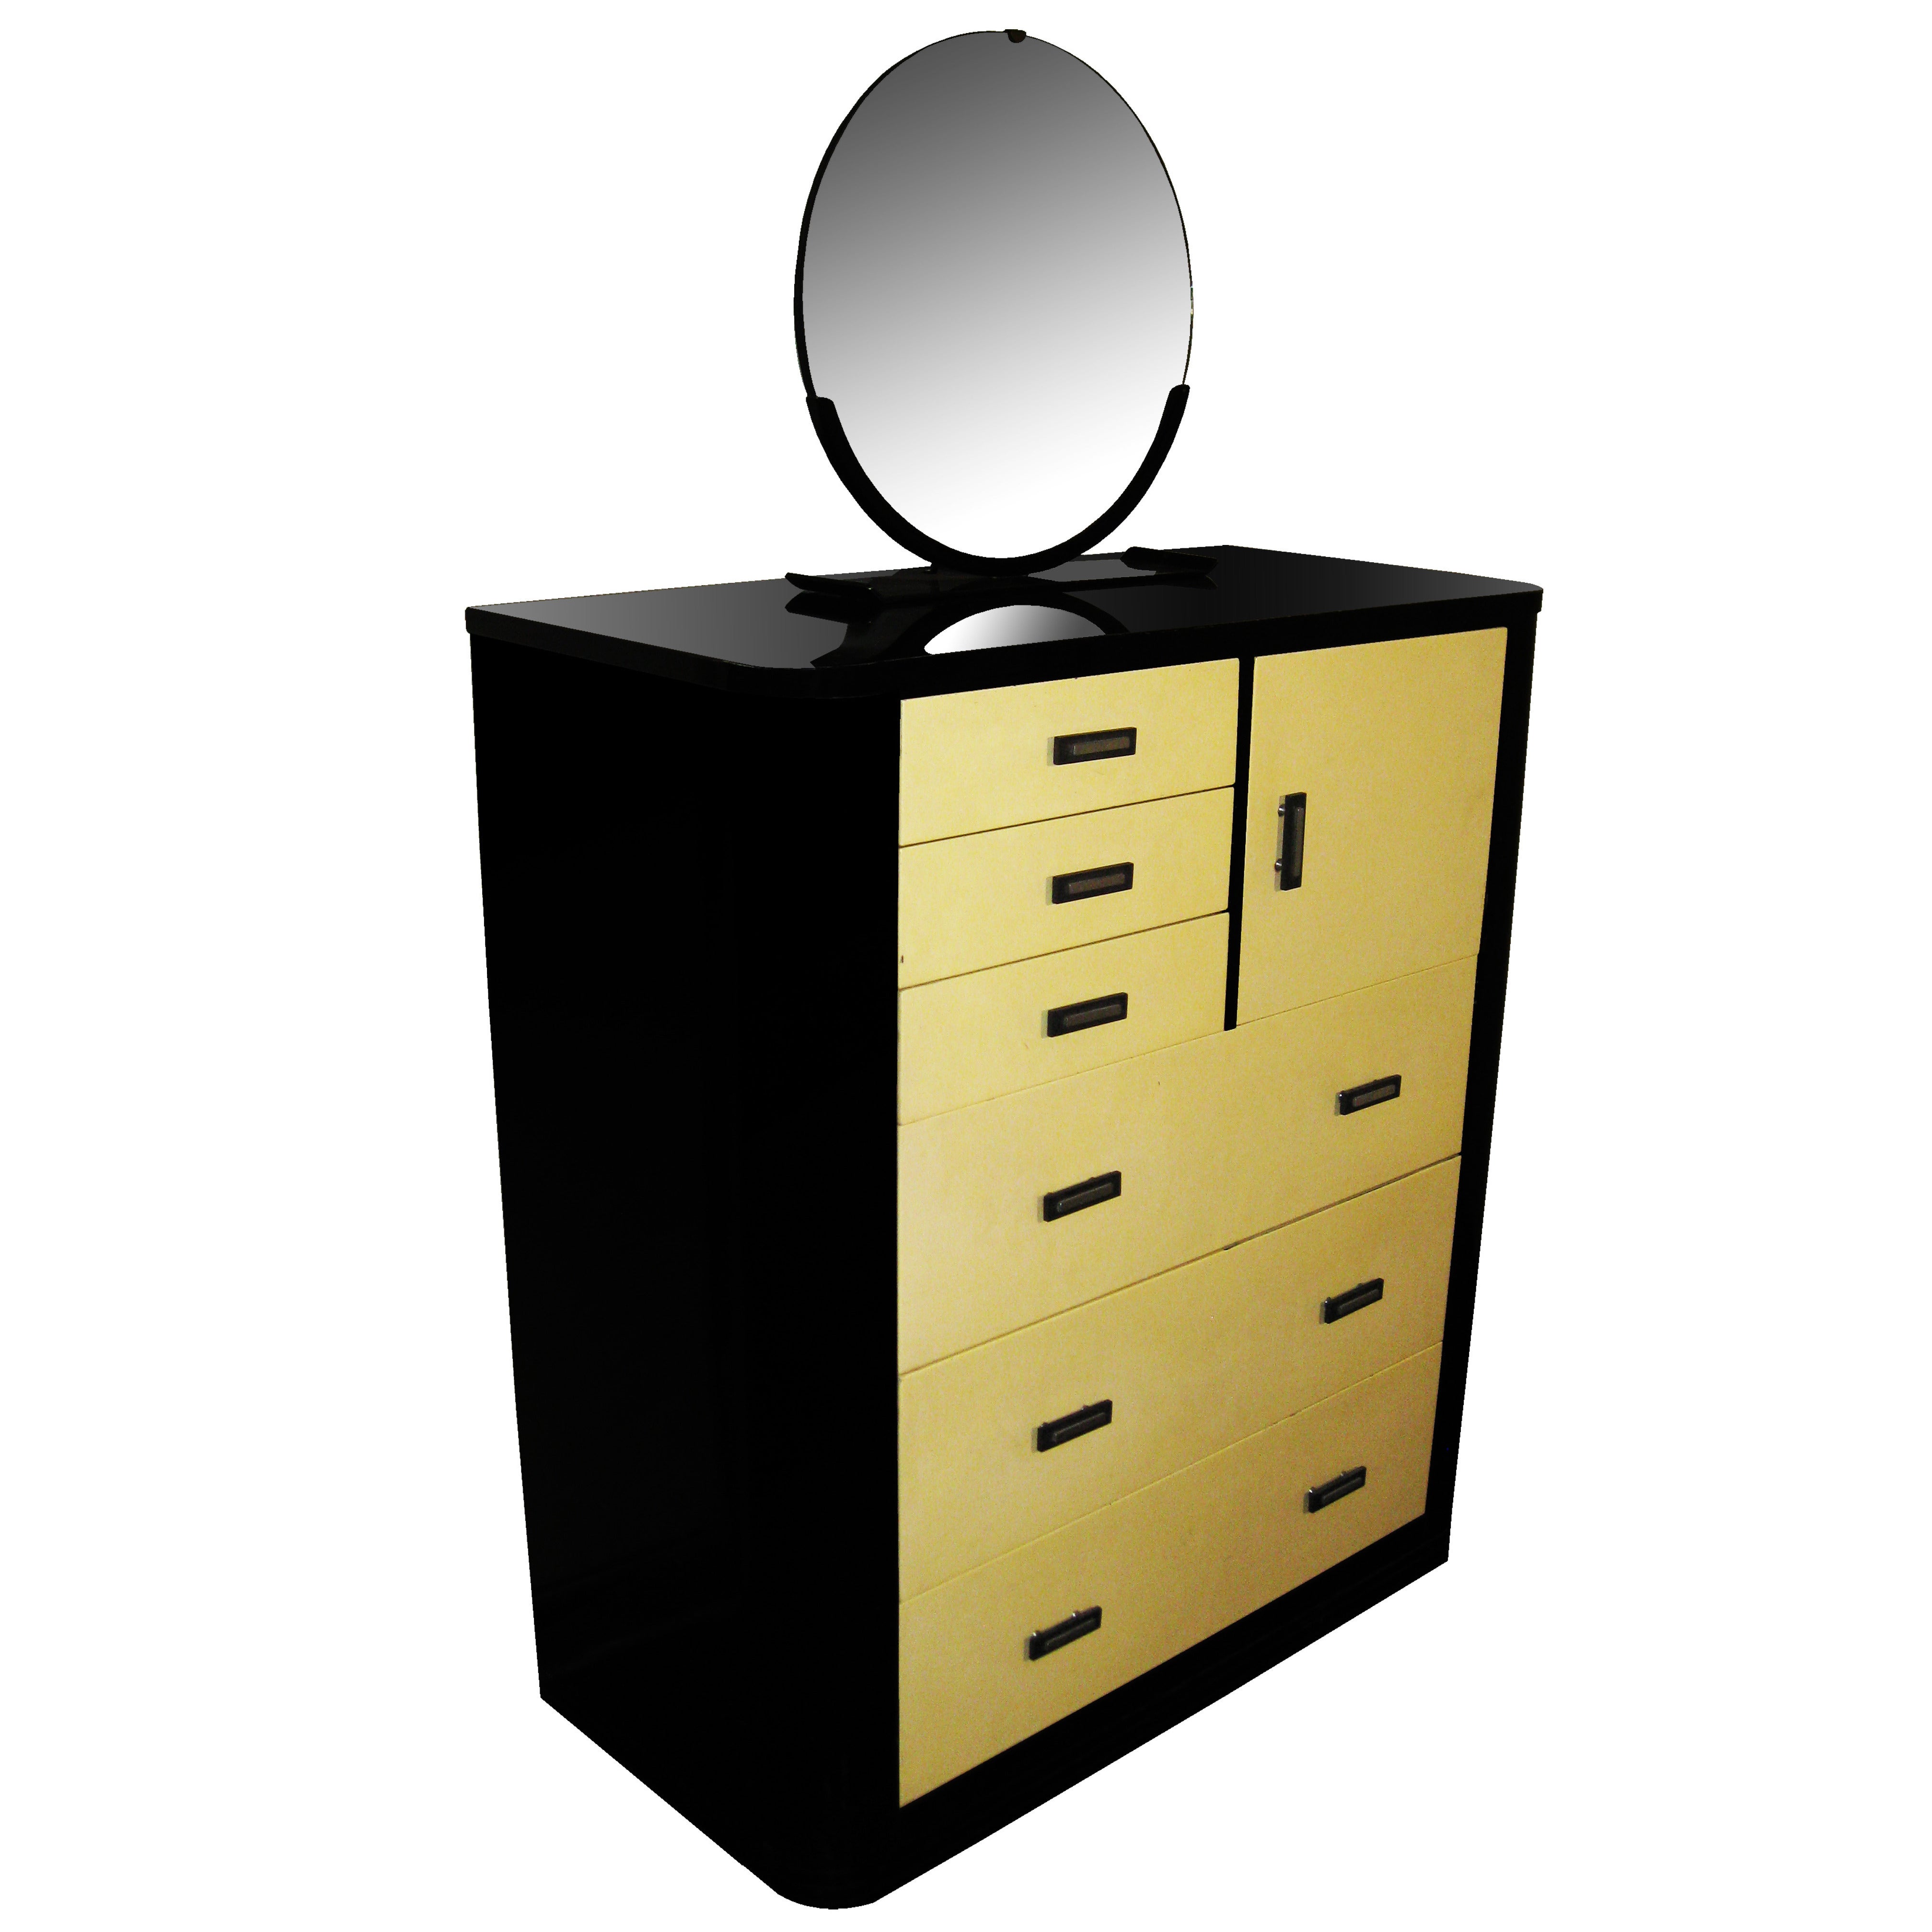 Gentleman's Dresser of Lacquered Metal with Removable Mirror, Norman Bel Geddes